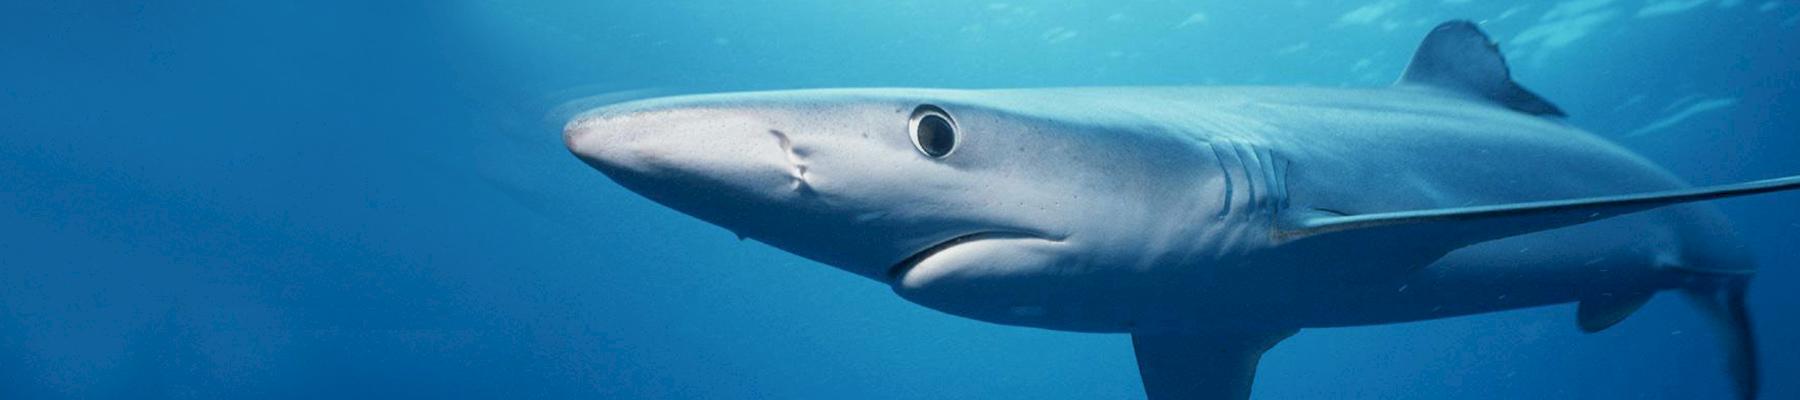 A Blue Shark Prionace glauca. Photo:  Southwest Fisheries Science Center, NOAA Fisheries Service